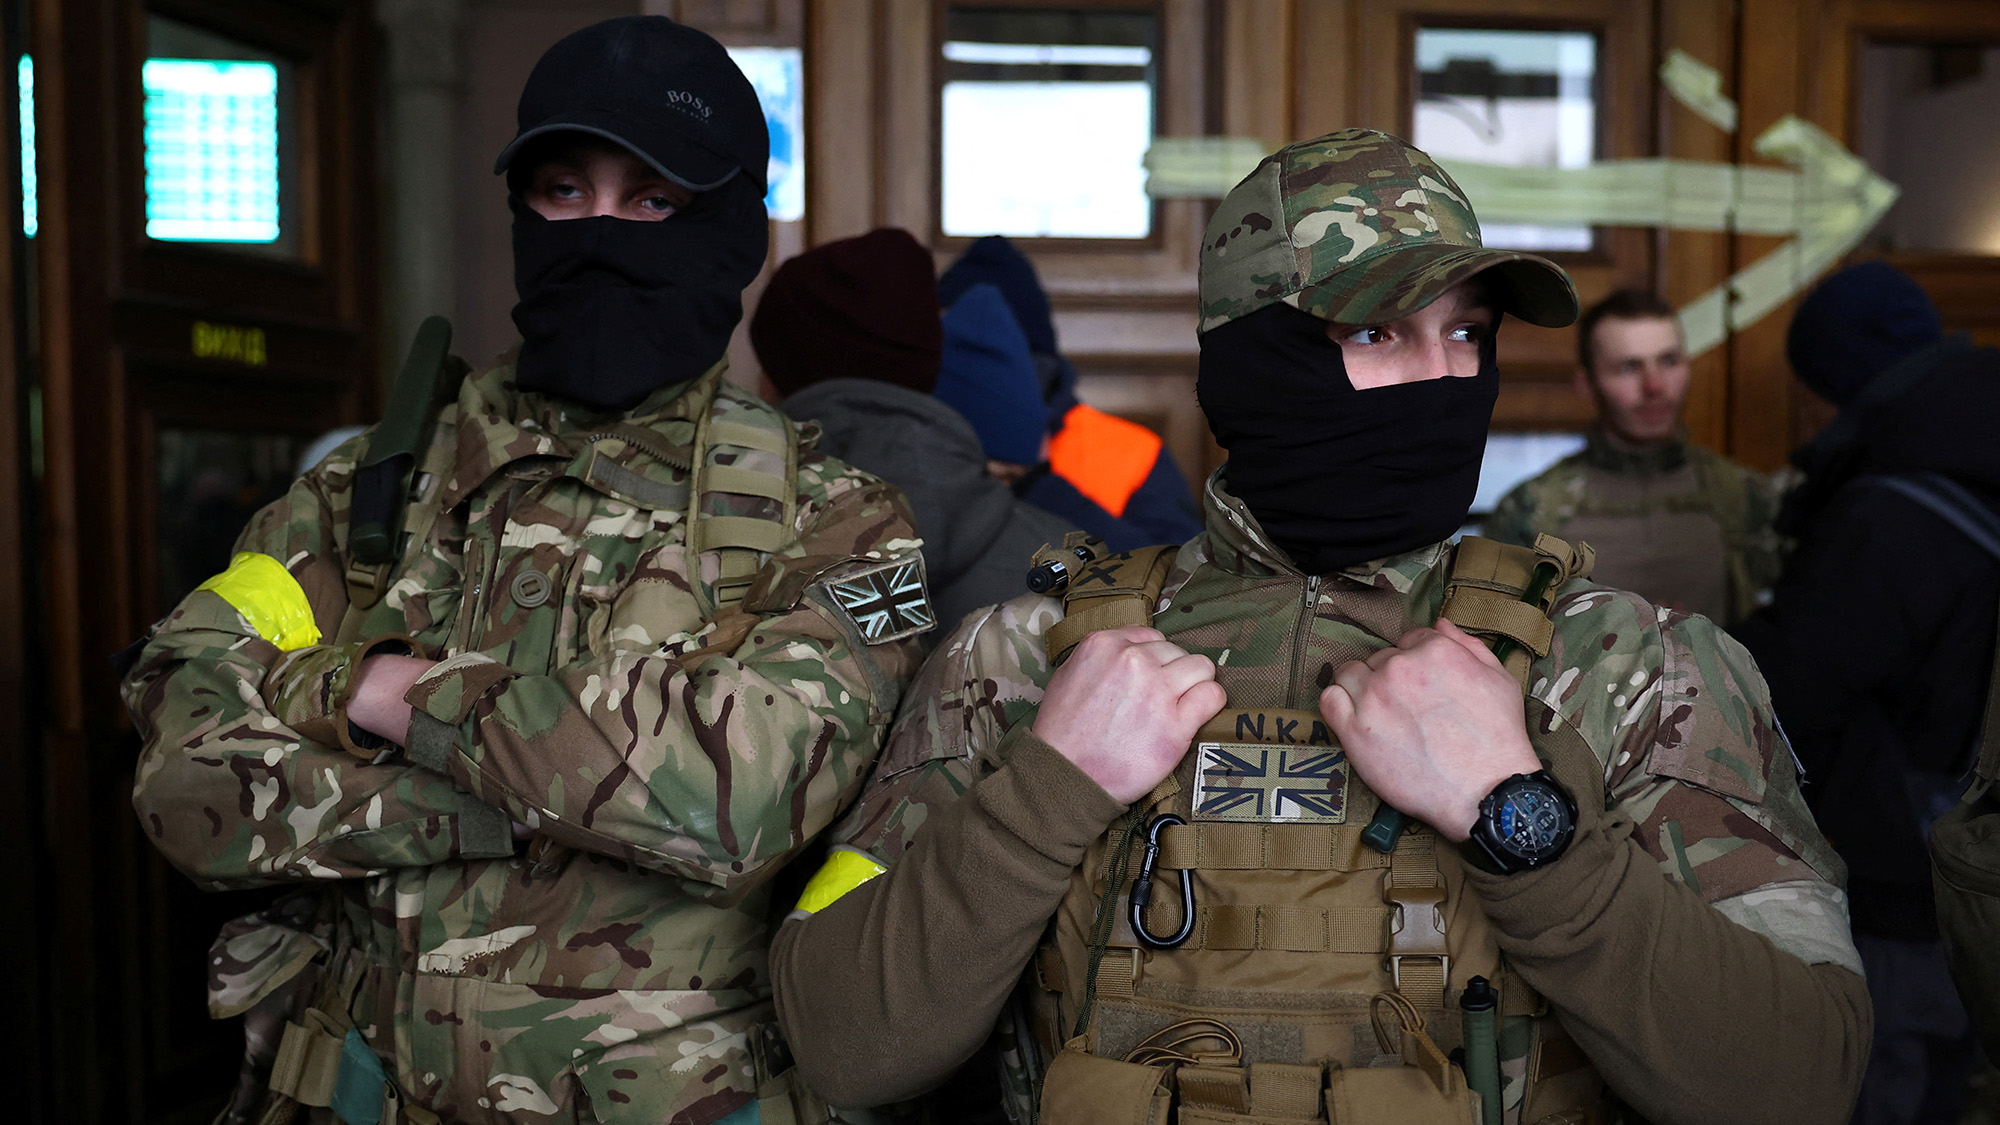 Two foreign fighters from the UK are seen as they prepare to depart to the front line at the main train station in Lviv, Ukraine on March 5.